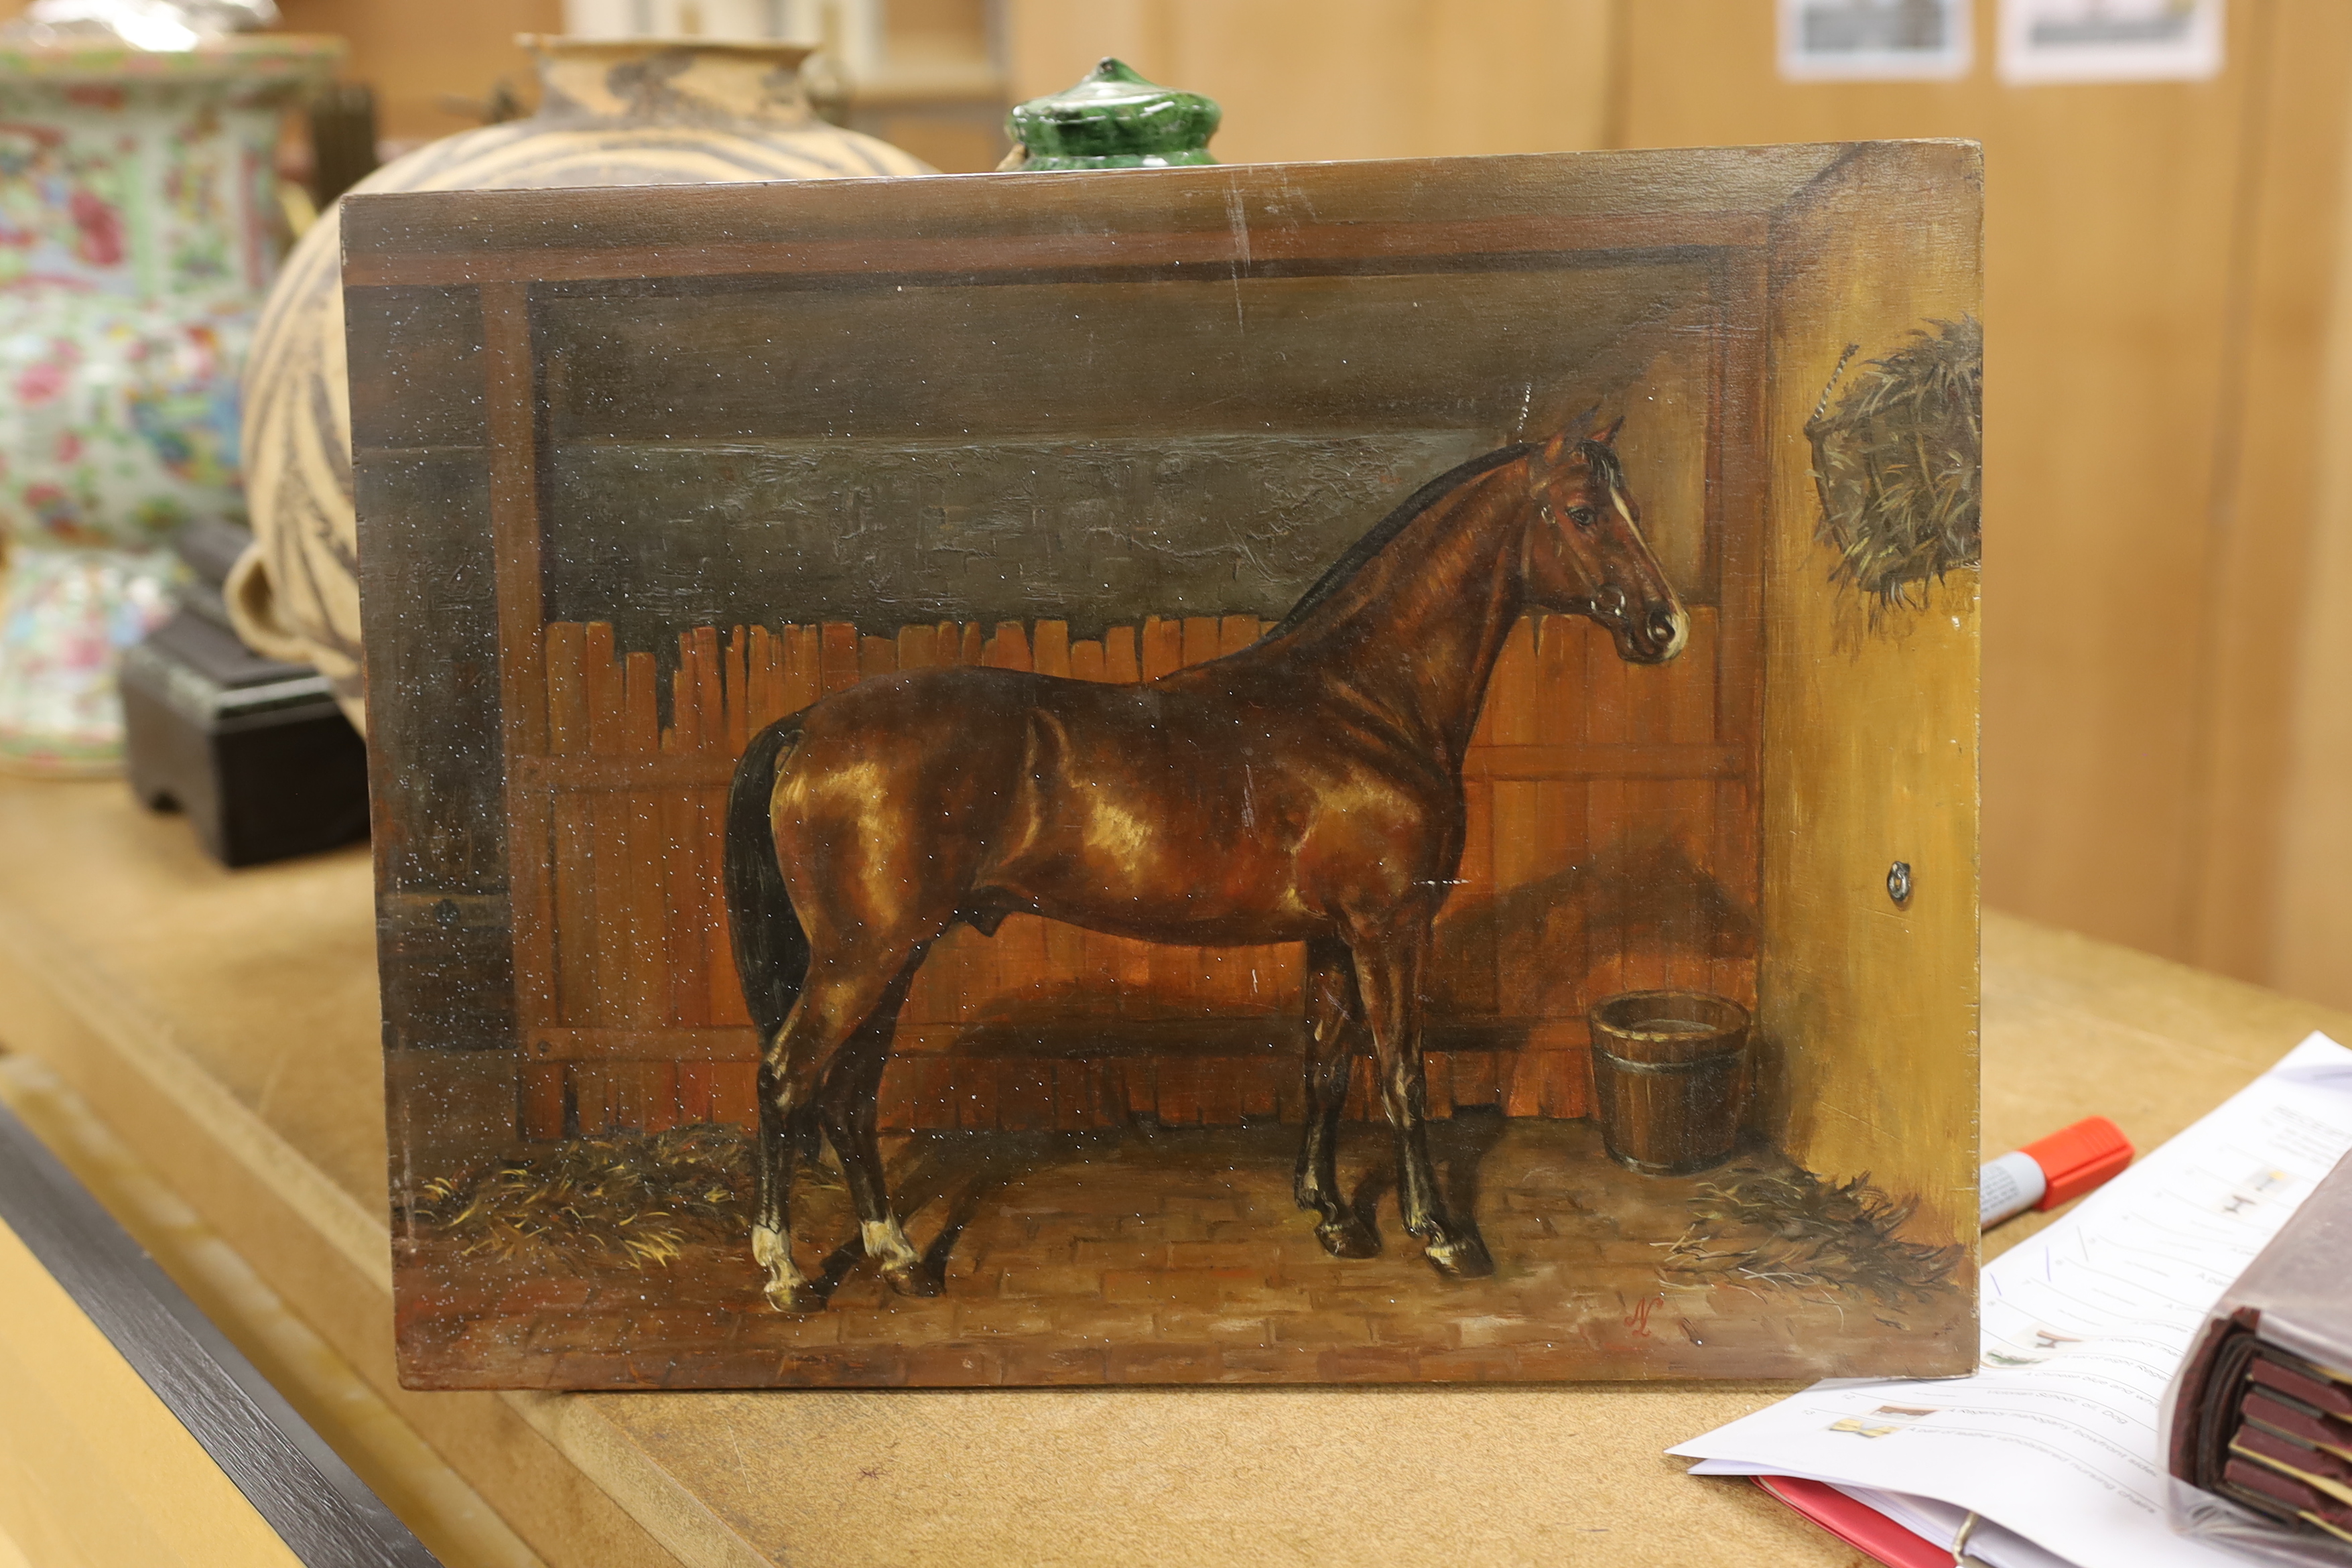 K. M. Nadler (20th. C), oil on board, Study of a bay horse in a stable, signed, 31 x 40cm, unframed